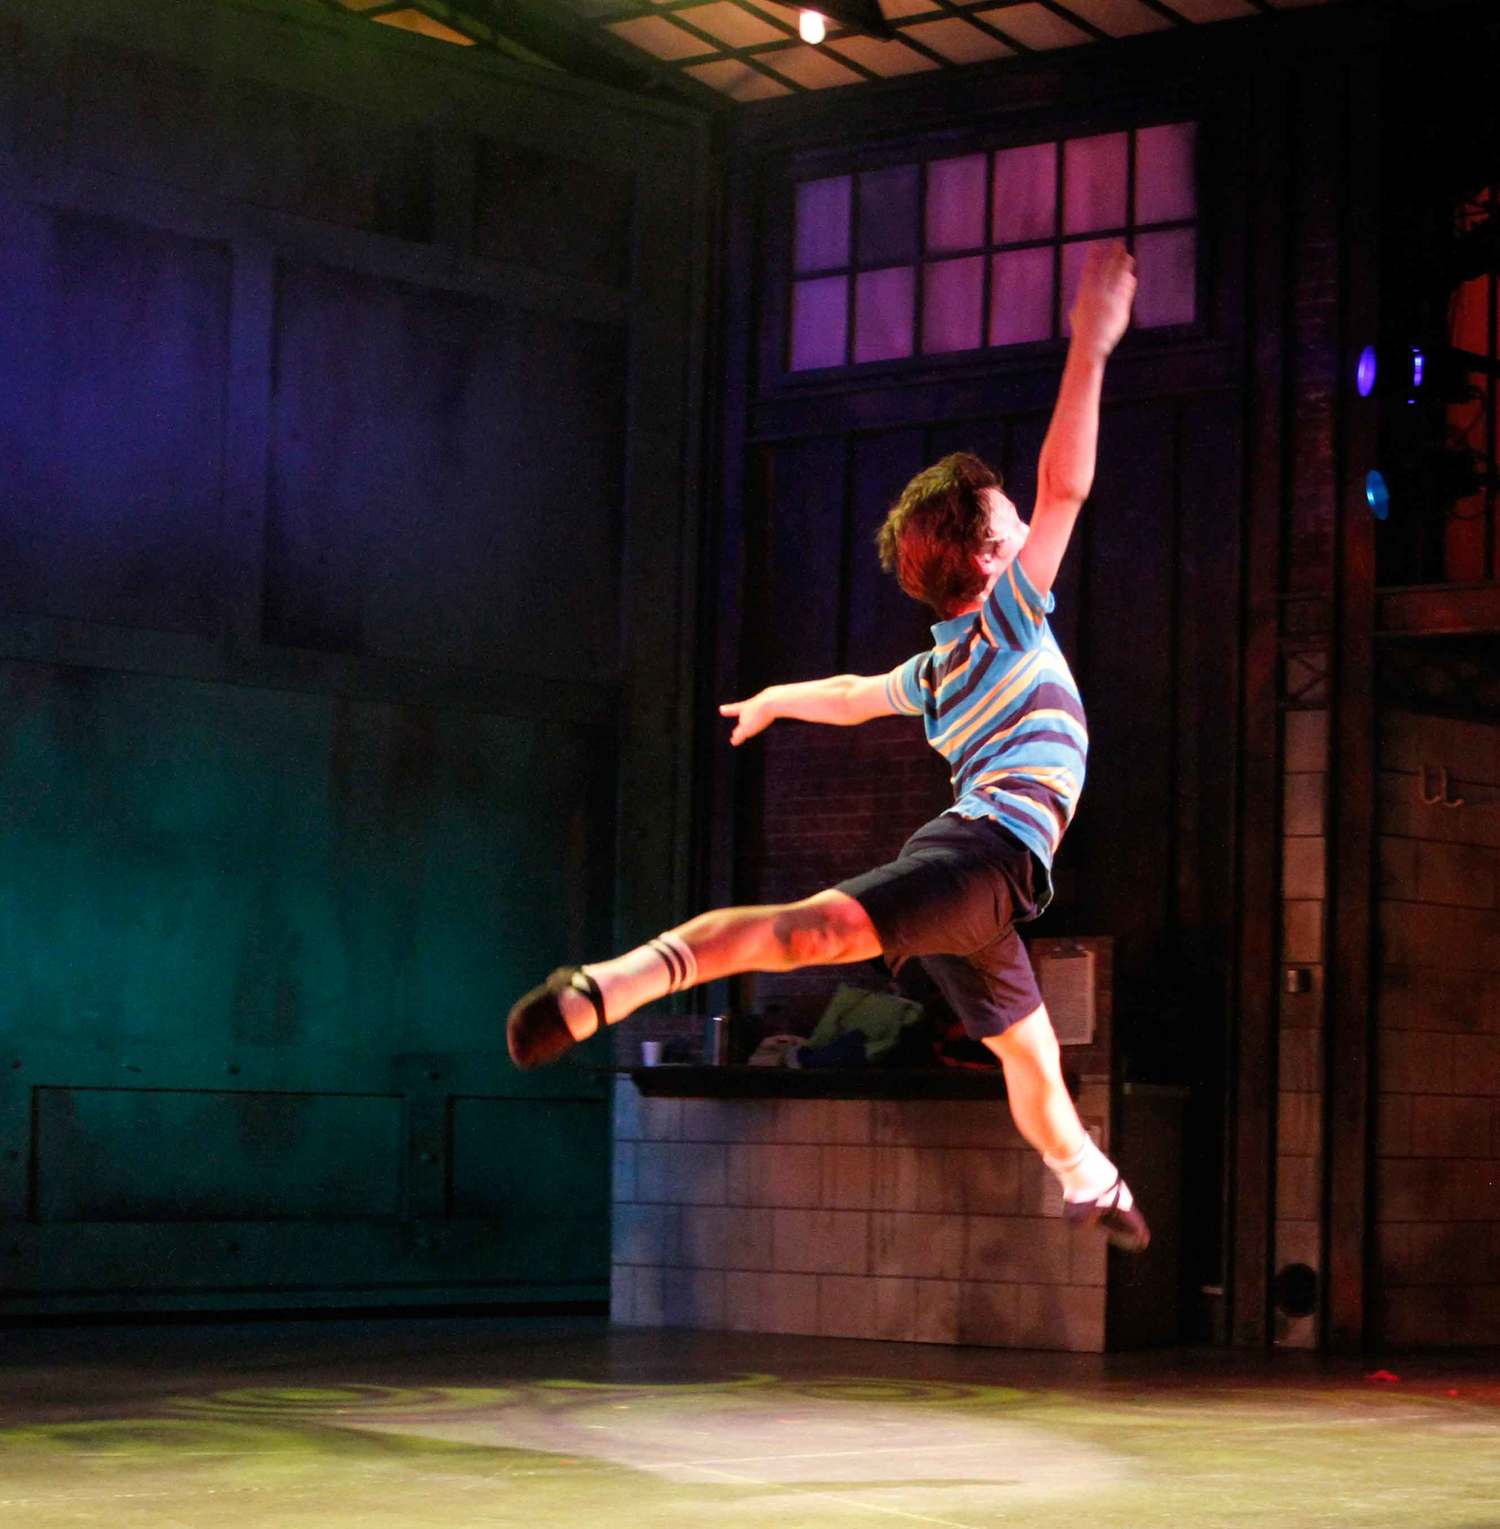 Billy leaps to new heights in this production!
-Reg Madison Photography